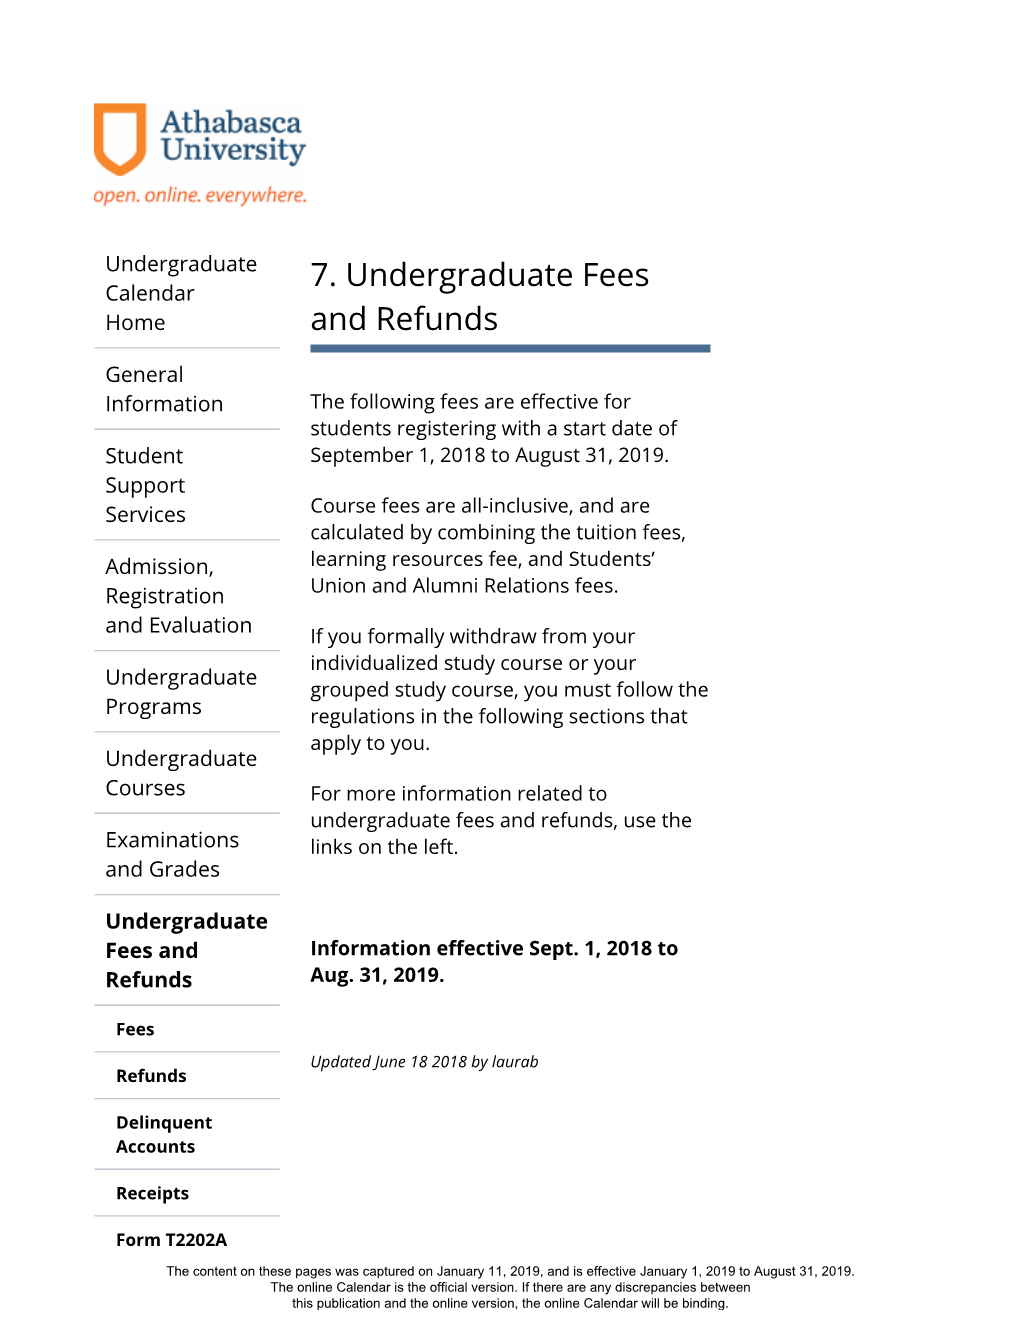 7. Undergraduate Fees and Refunds